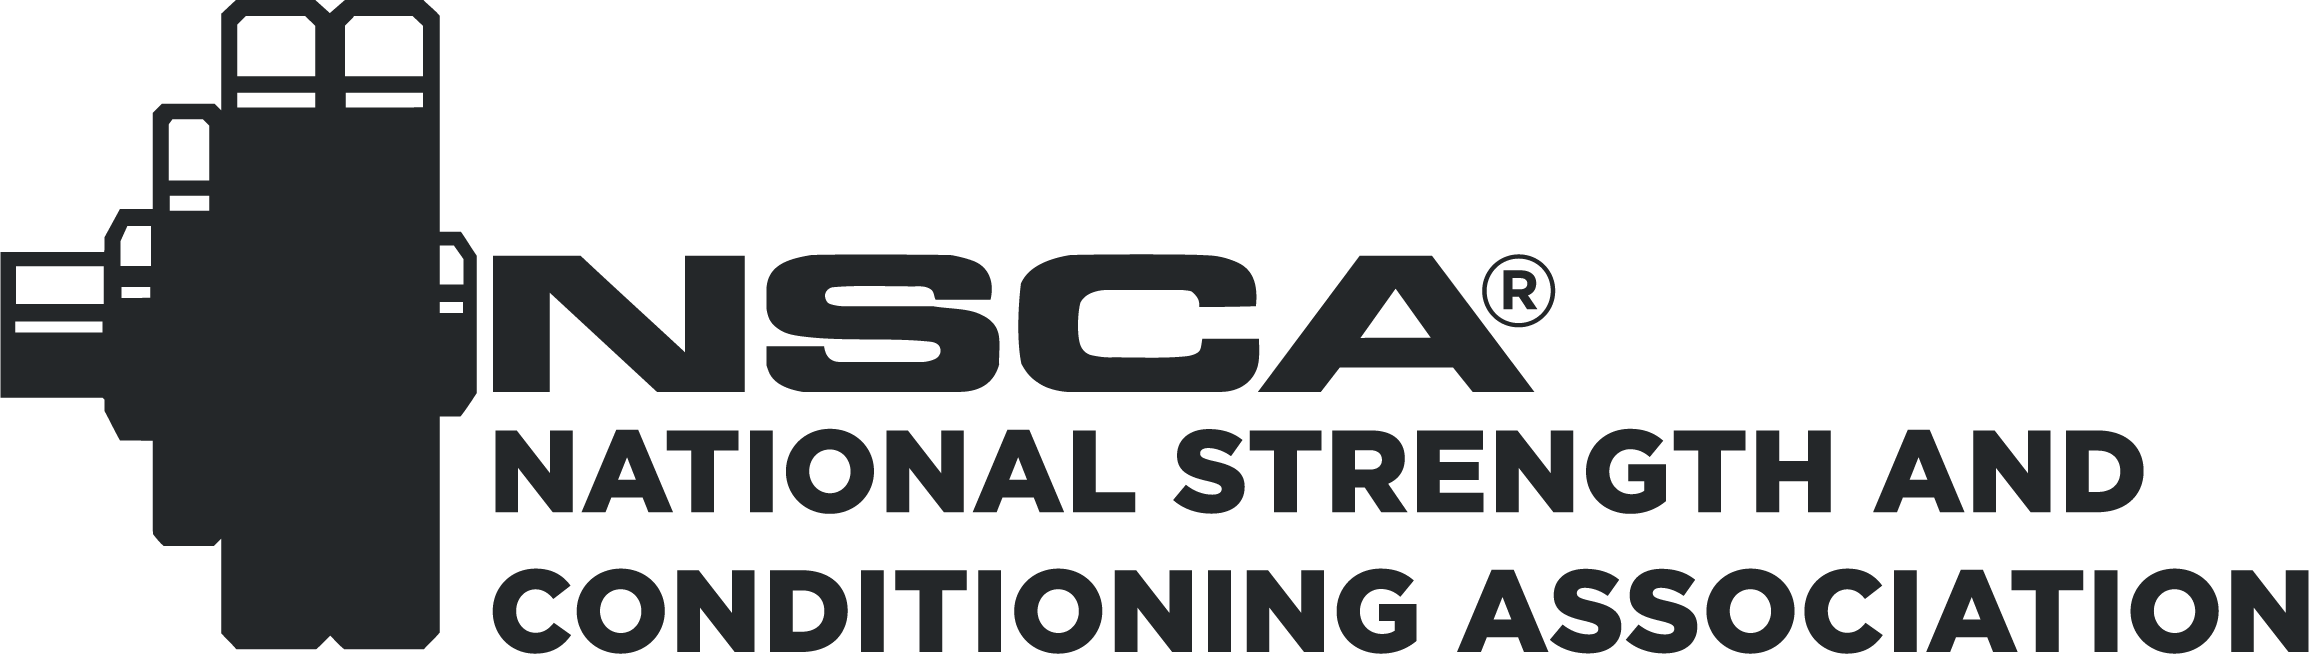 National Strength and Conditioning Association logo.